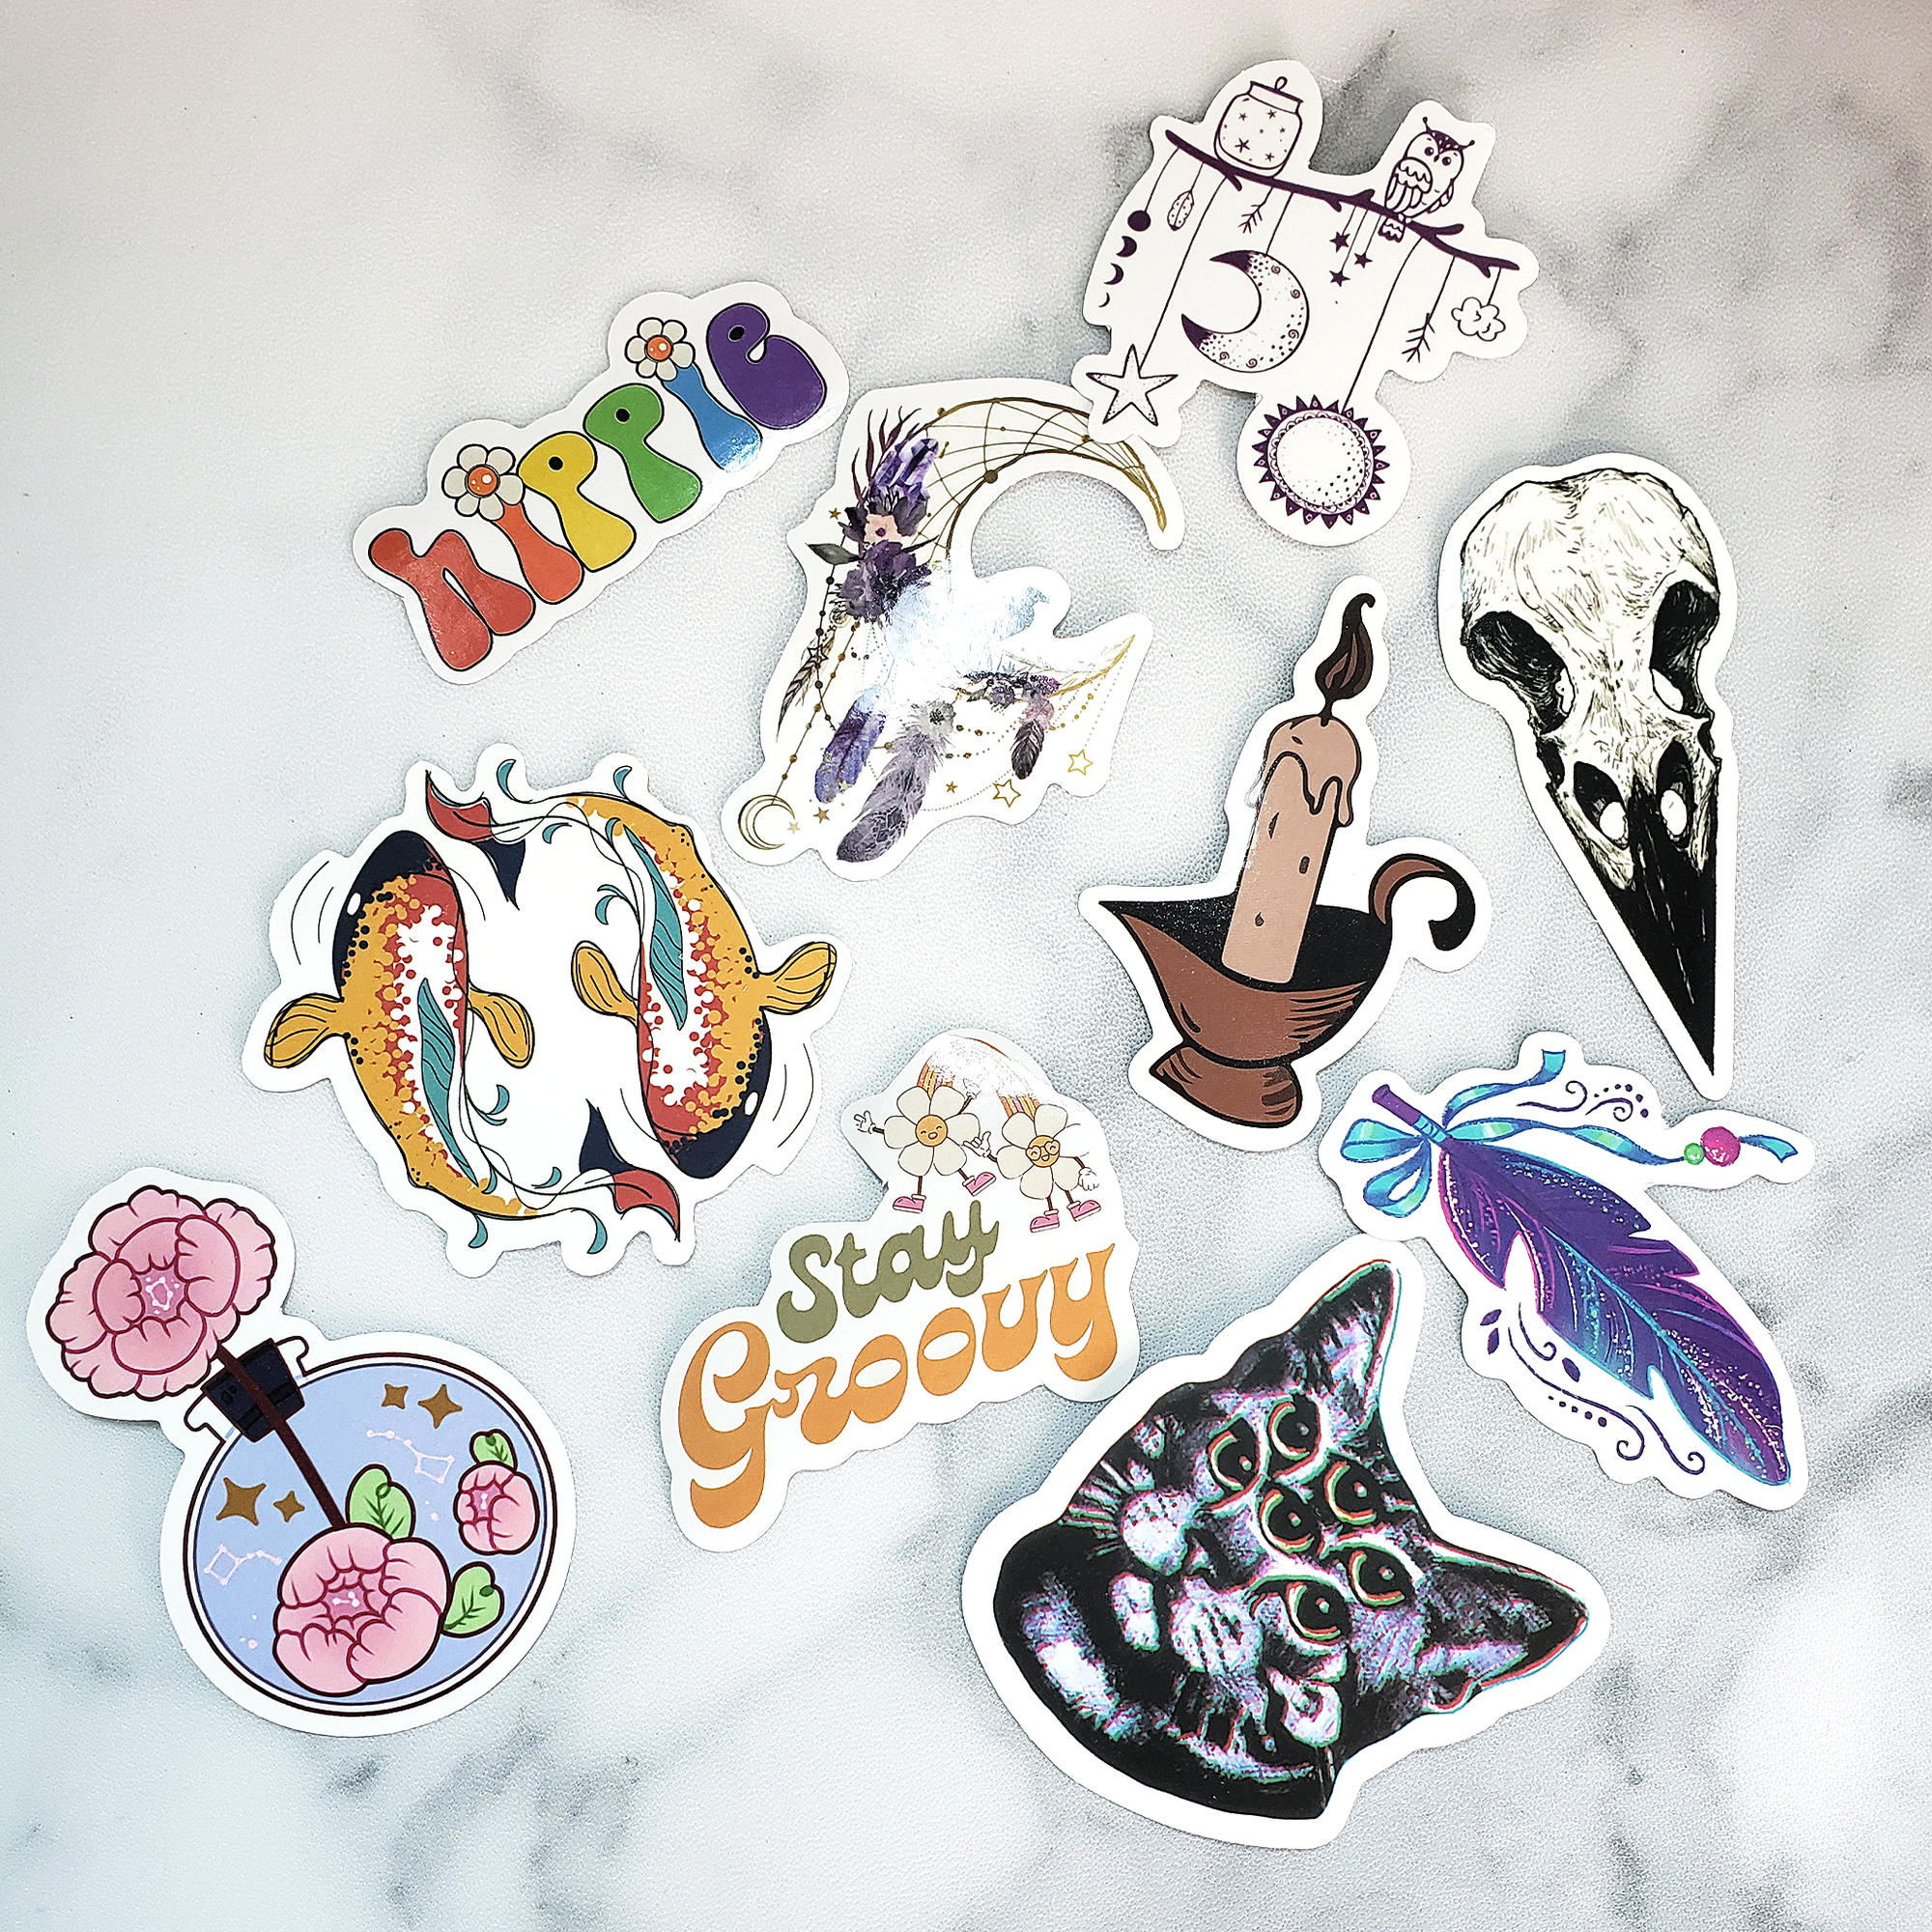 Randomly Selected Aesthetic Sticker - Cute, Witchy, Bohemian, Trippy - Mix of Cute Stickers